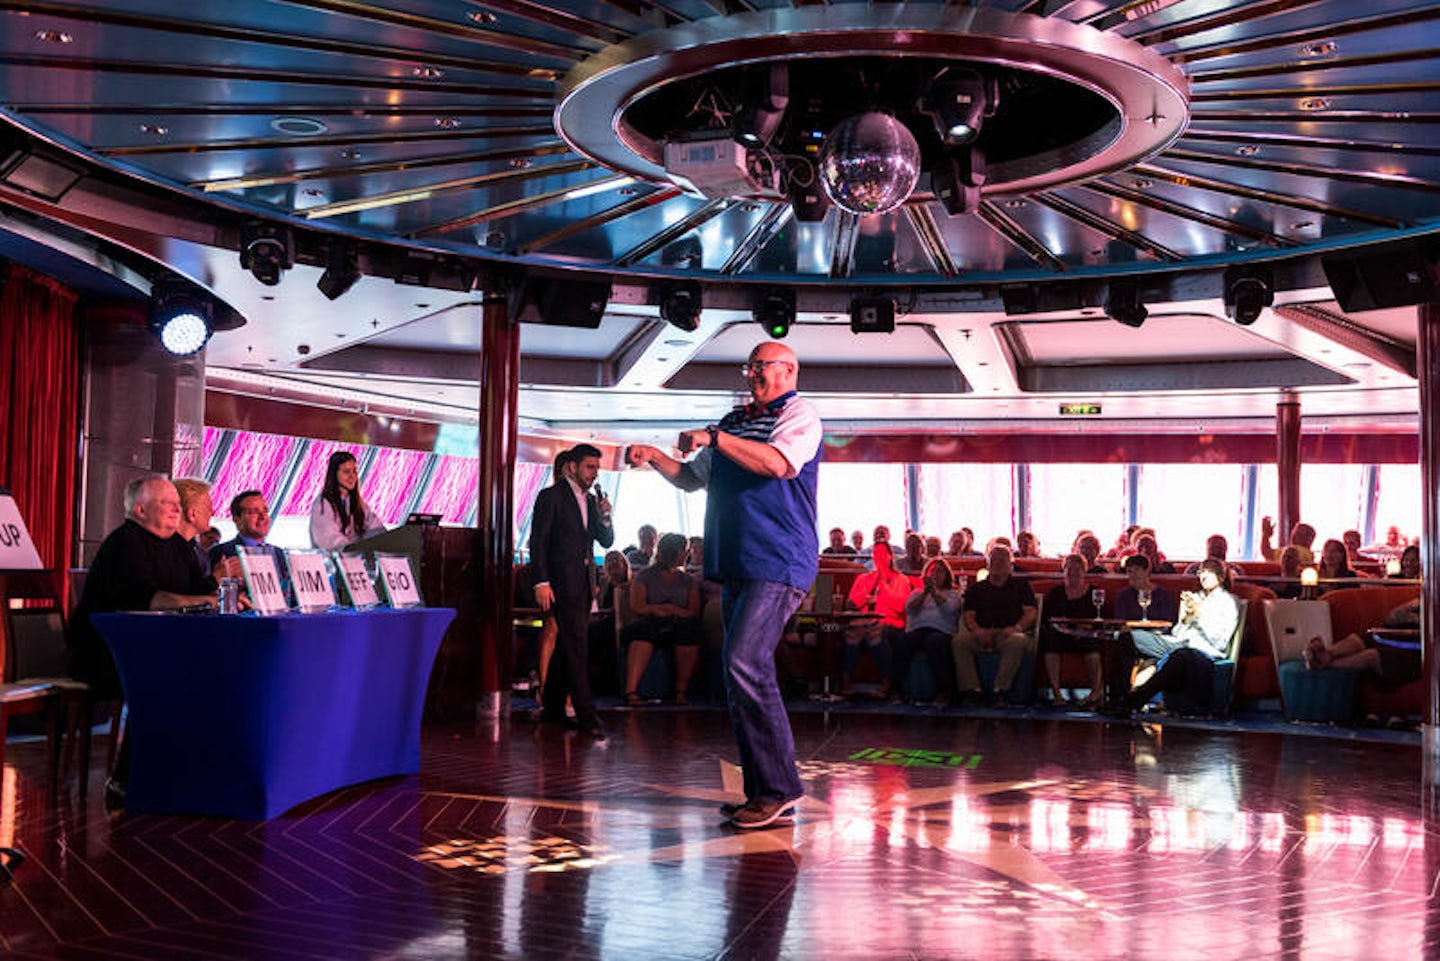 Biggest Liar Show at Spinnaker Lounge on Norwegian Pearl